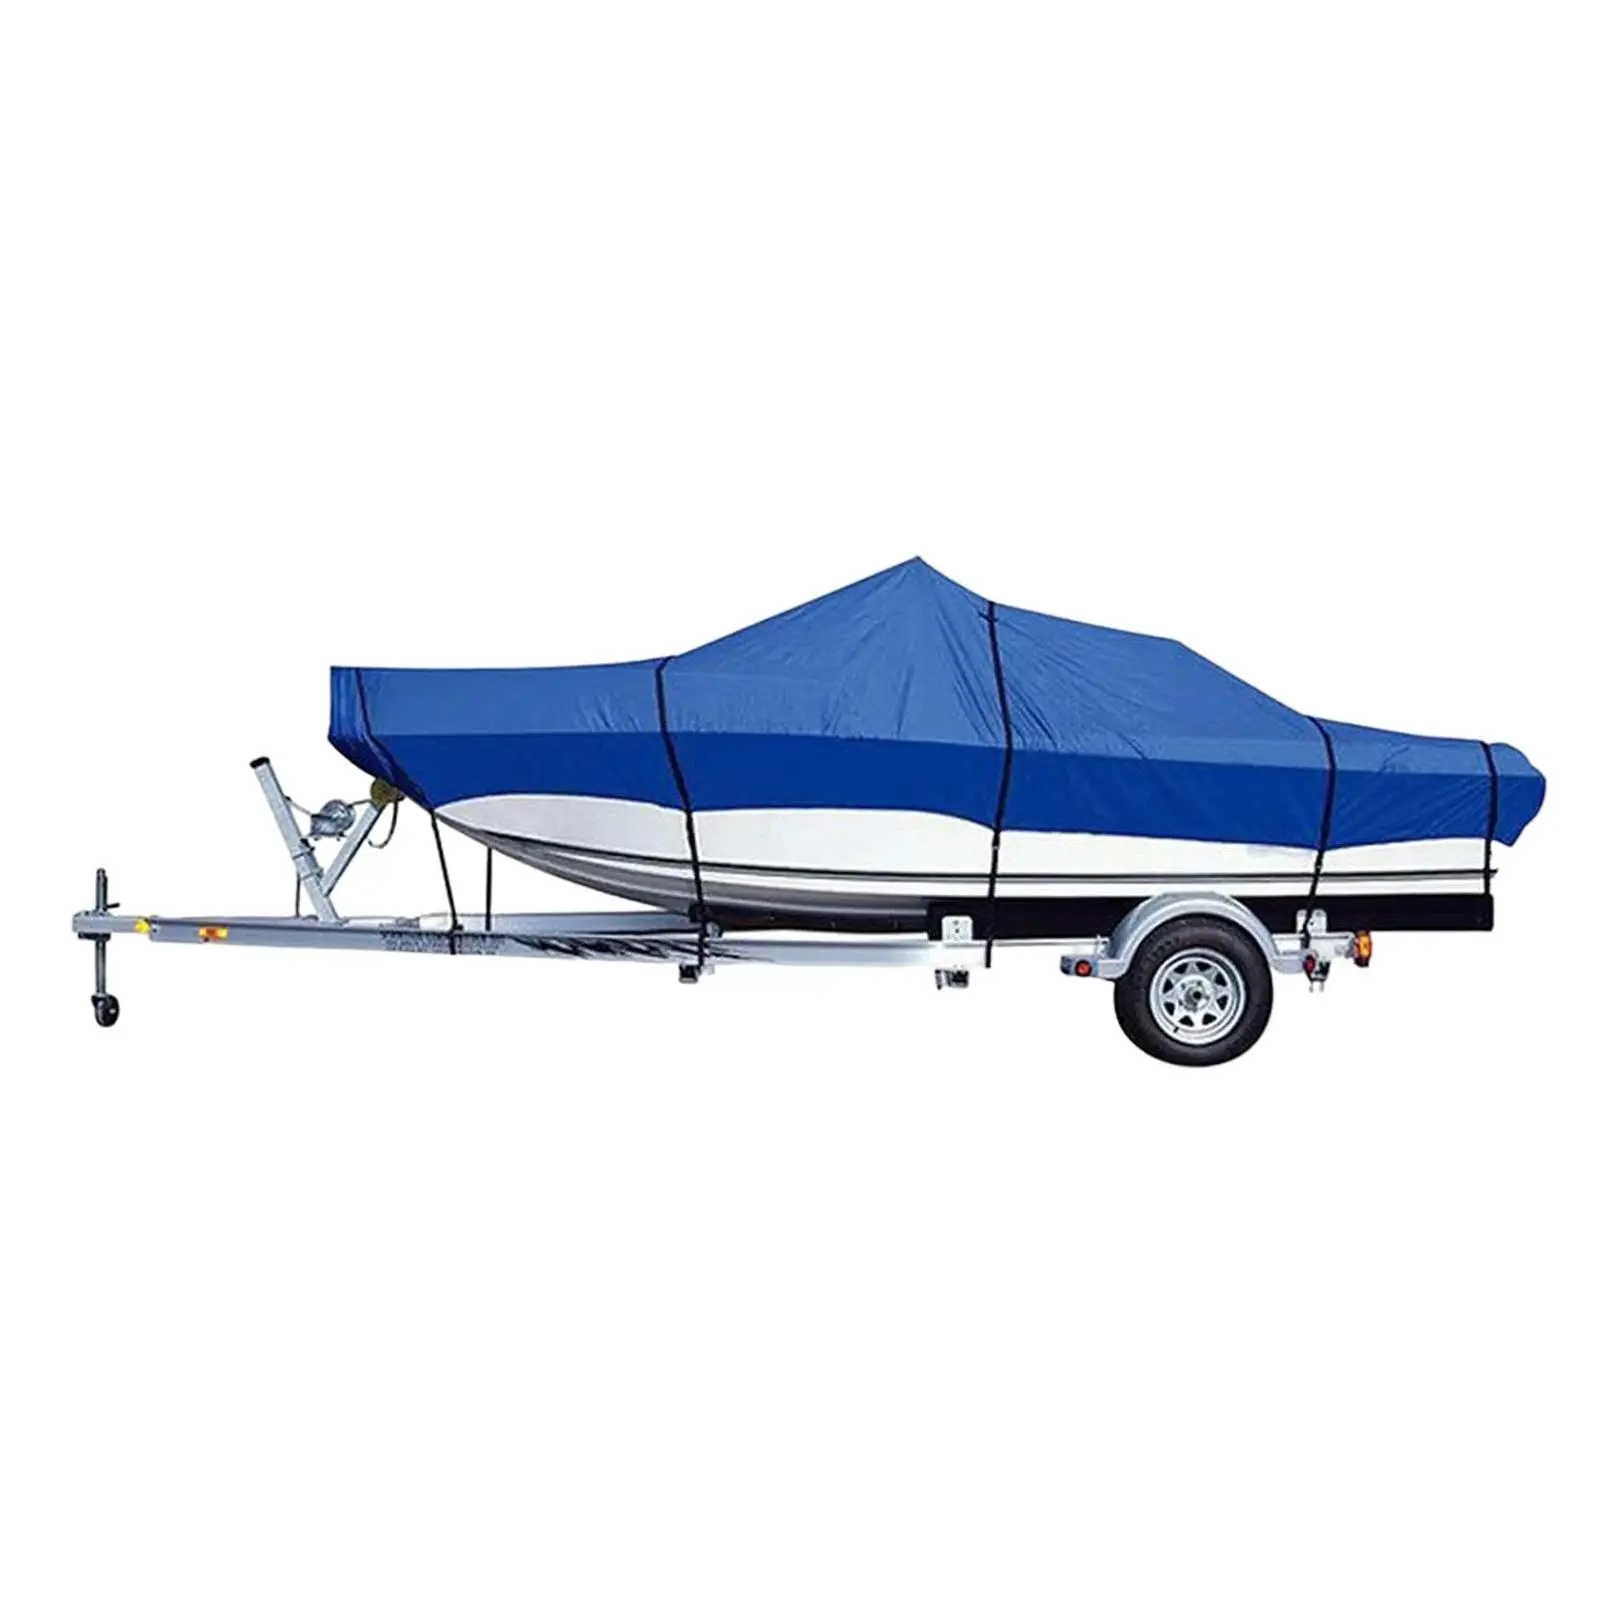 210D Oxford Cloth Boat Cover Anti UV for V Hull Inflatable Boat Boat